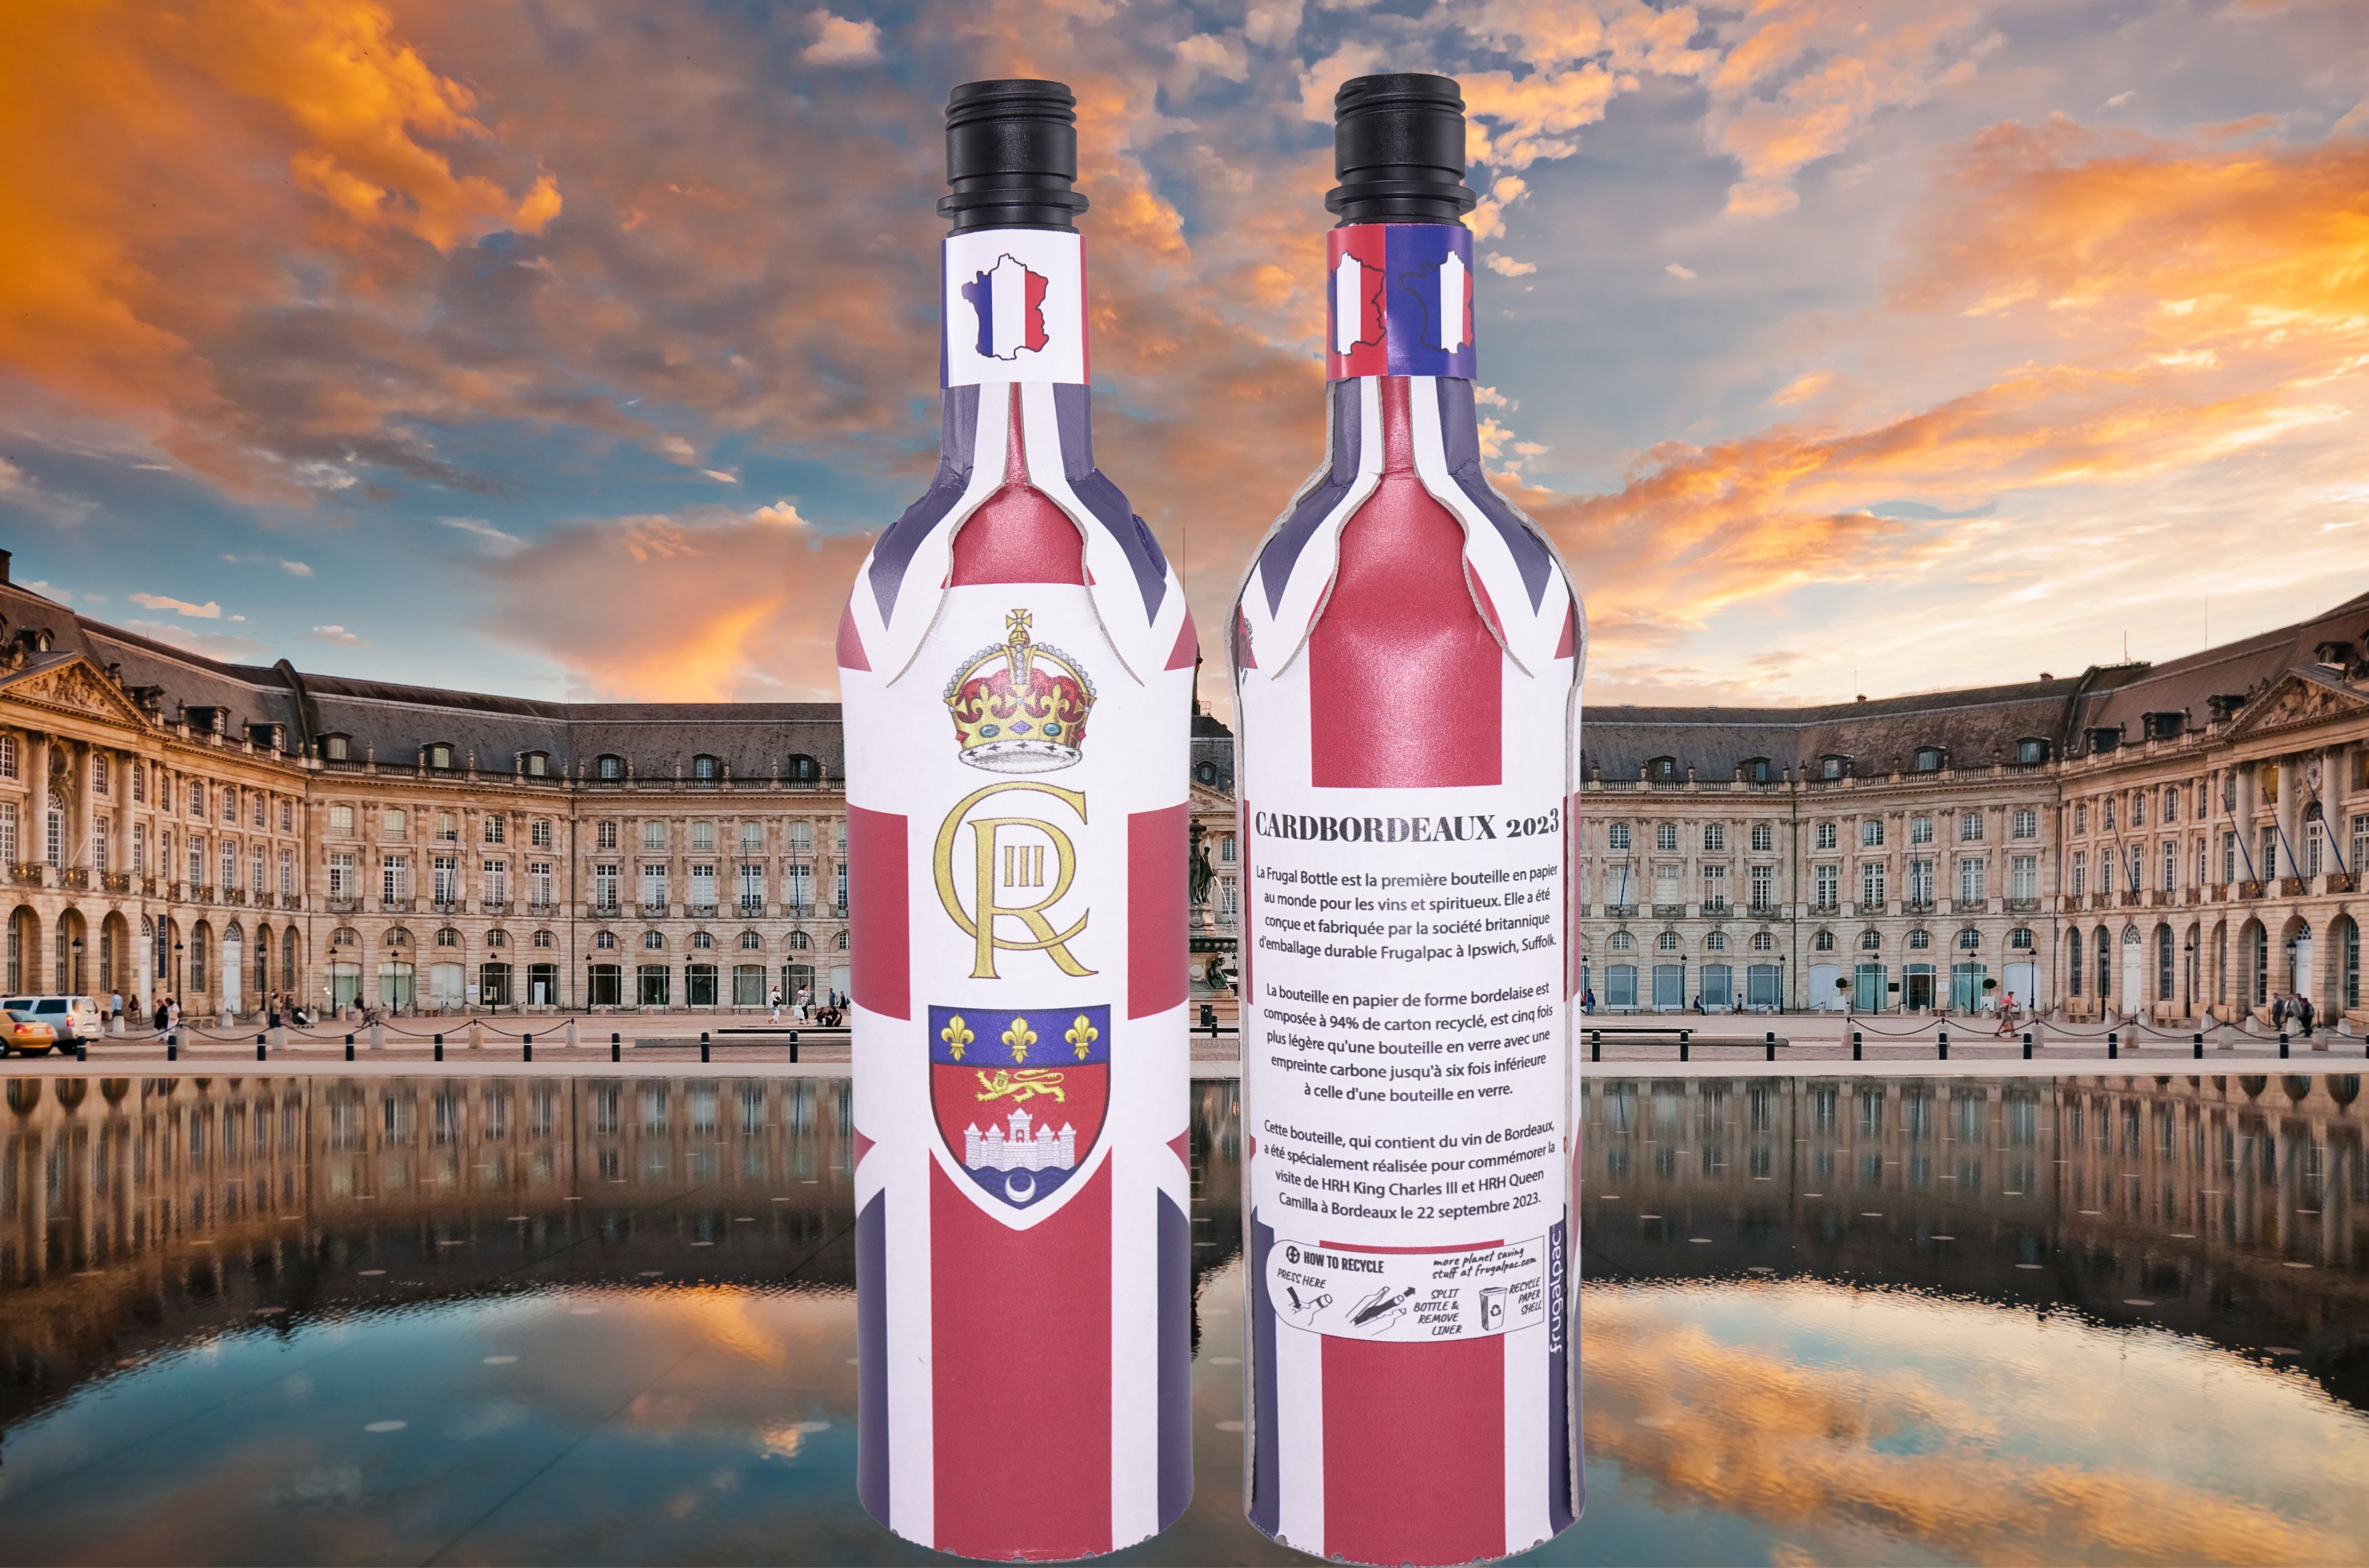 Cardbordeaux 2023 – Frugalpac produces special paper bottle for the King and Queen